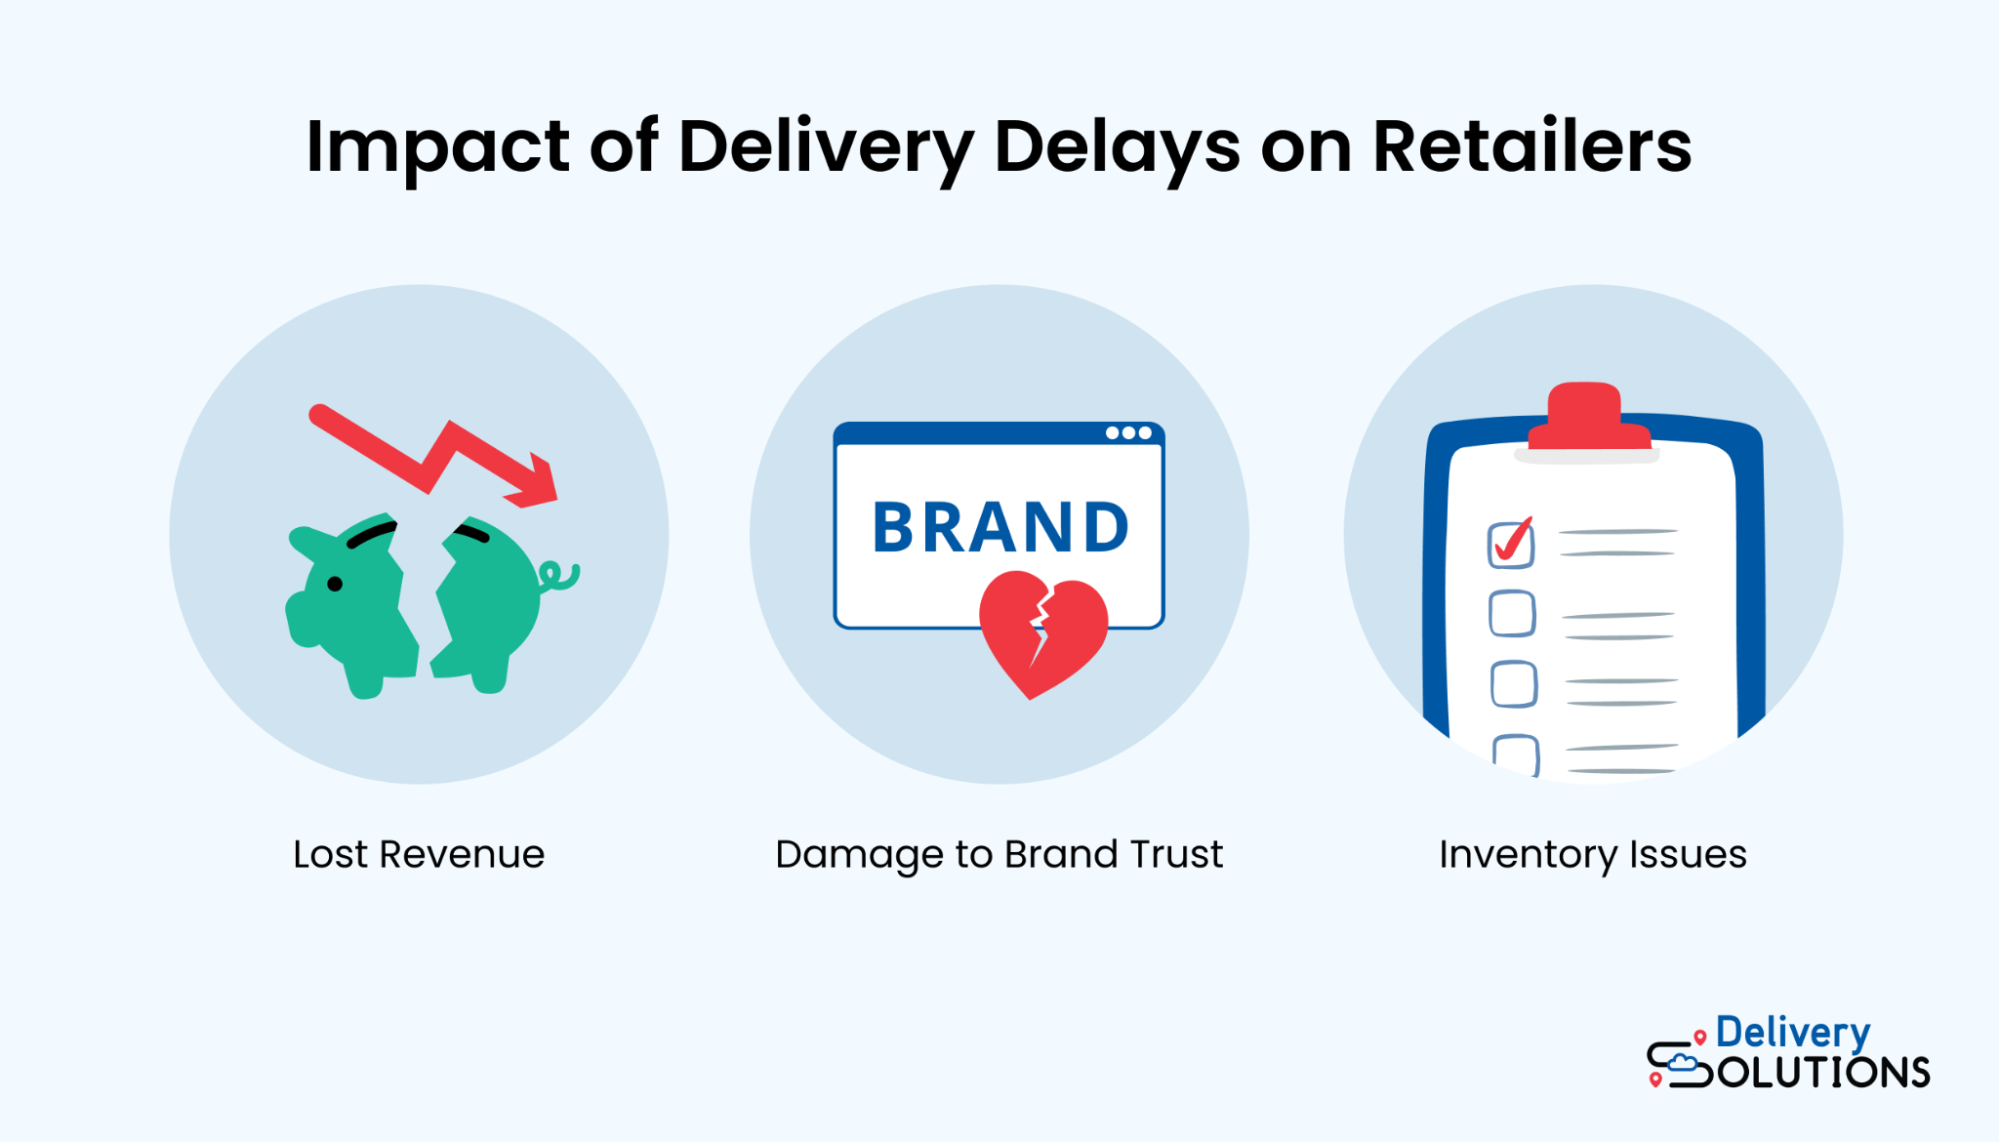 Impact of delivery delays on retailers